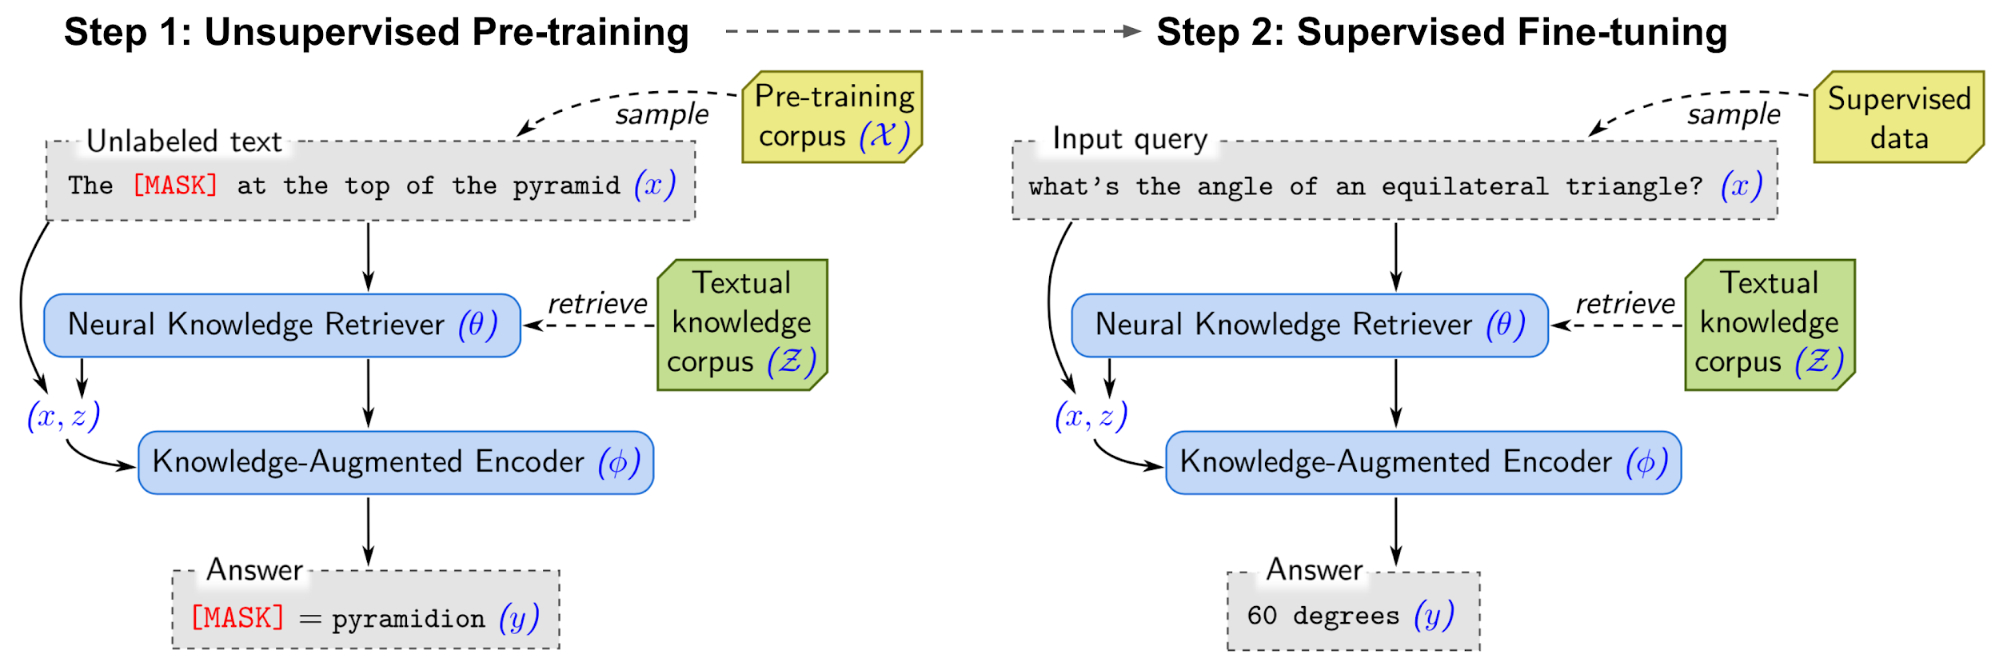 natural-questions/nq_open/NQ-open.dev.jsonl at master ·  google-research-datasets/natural-questions · GitHub